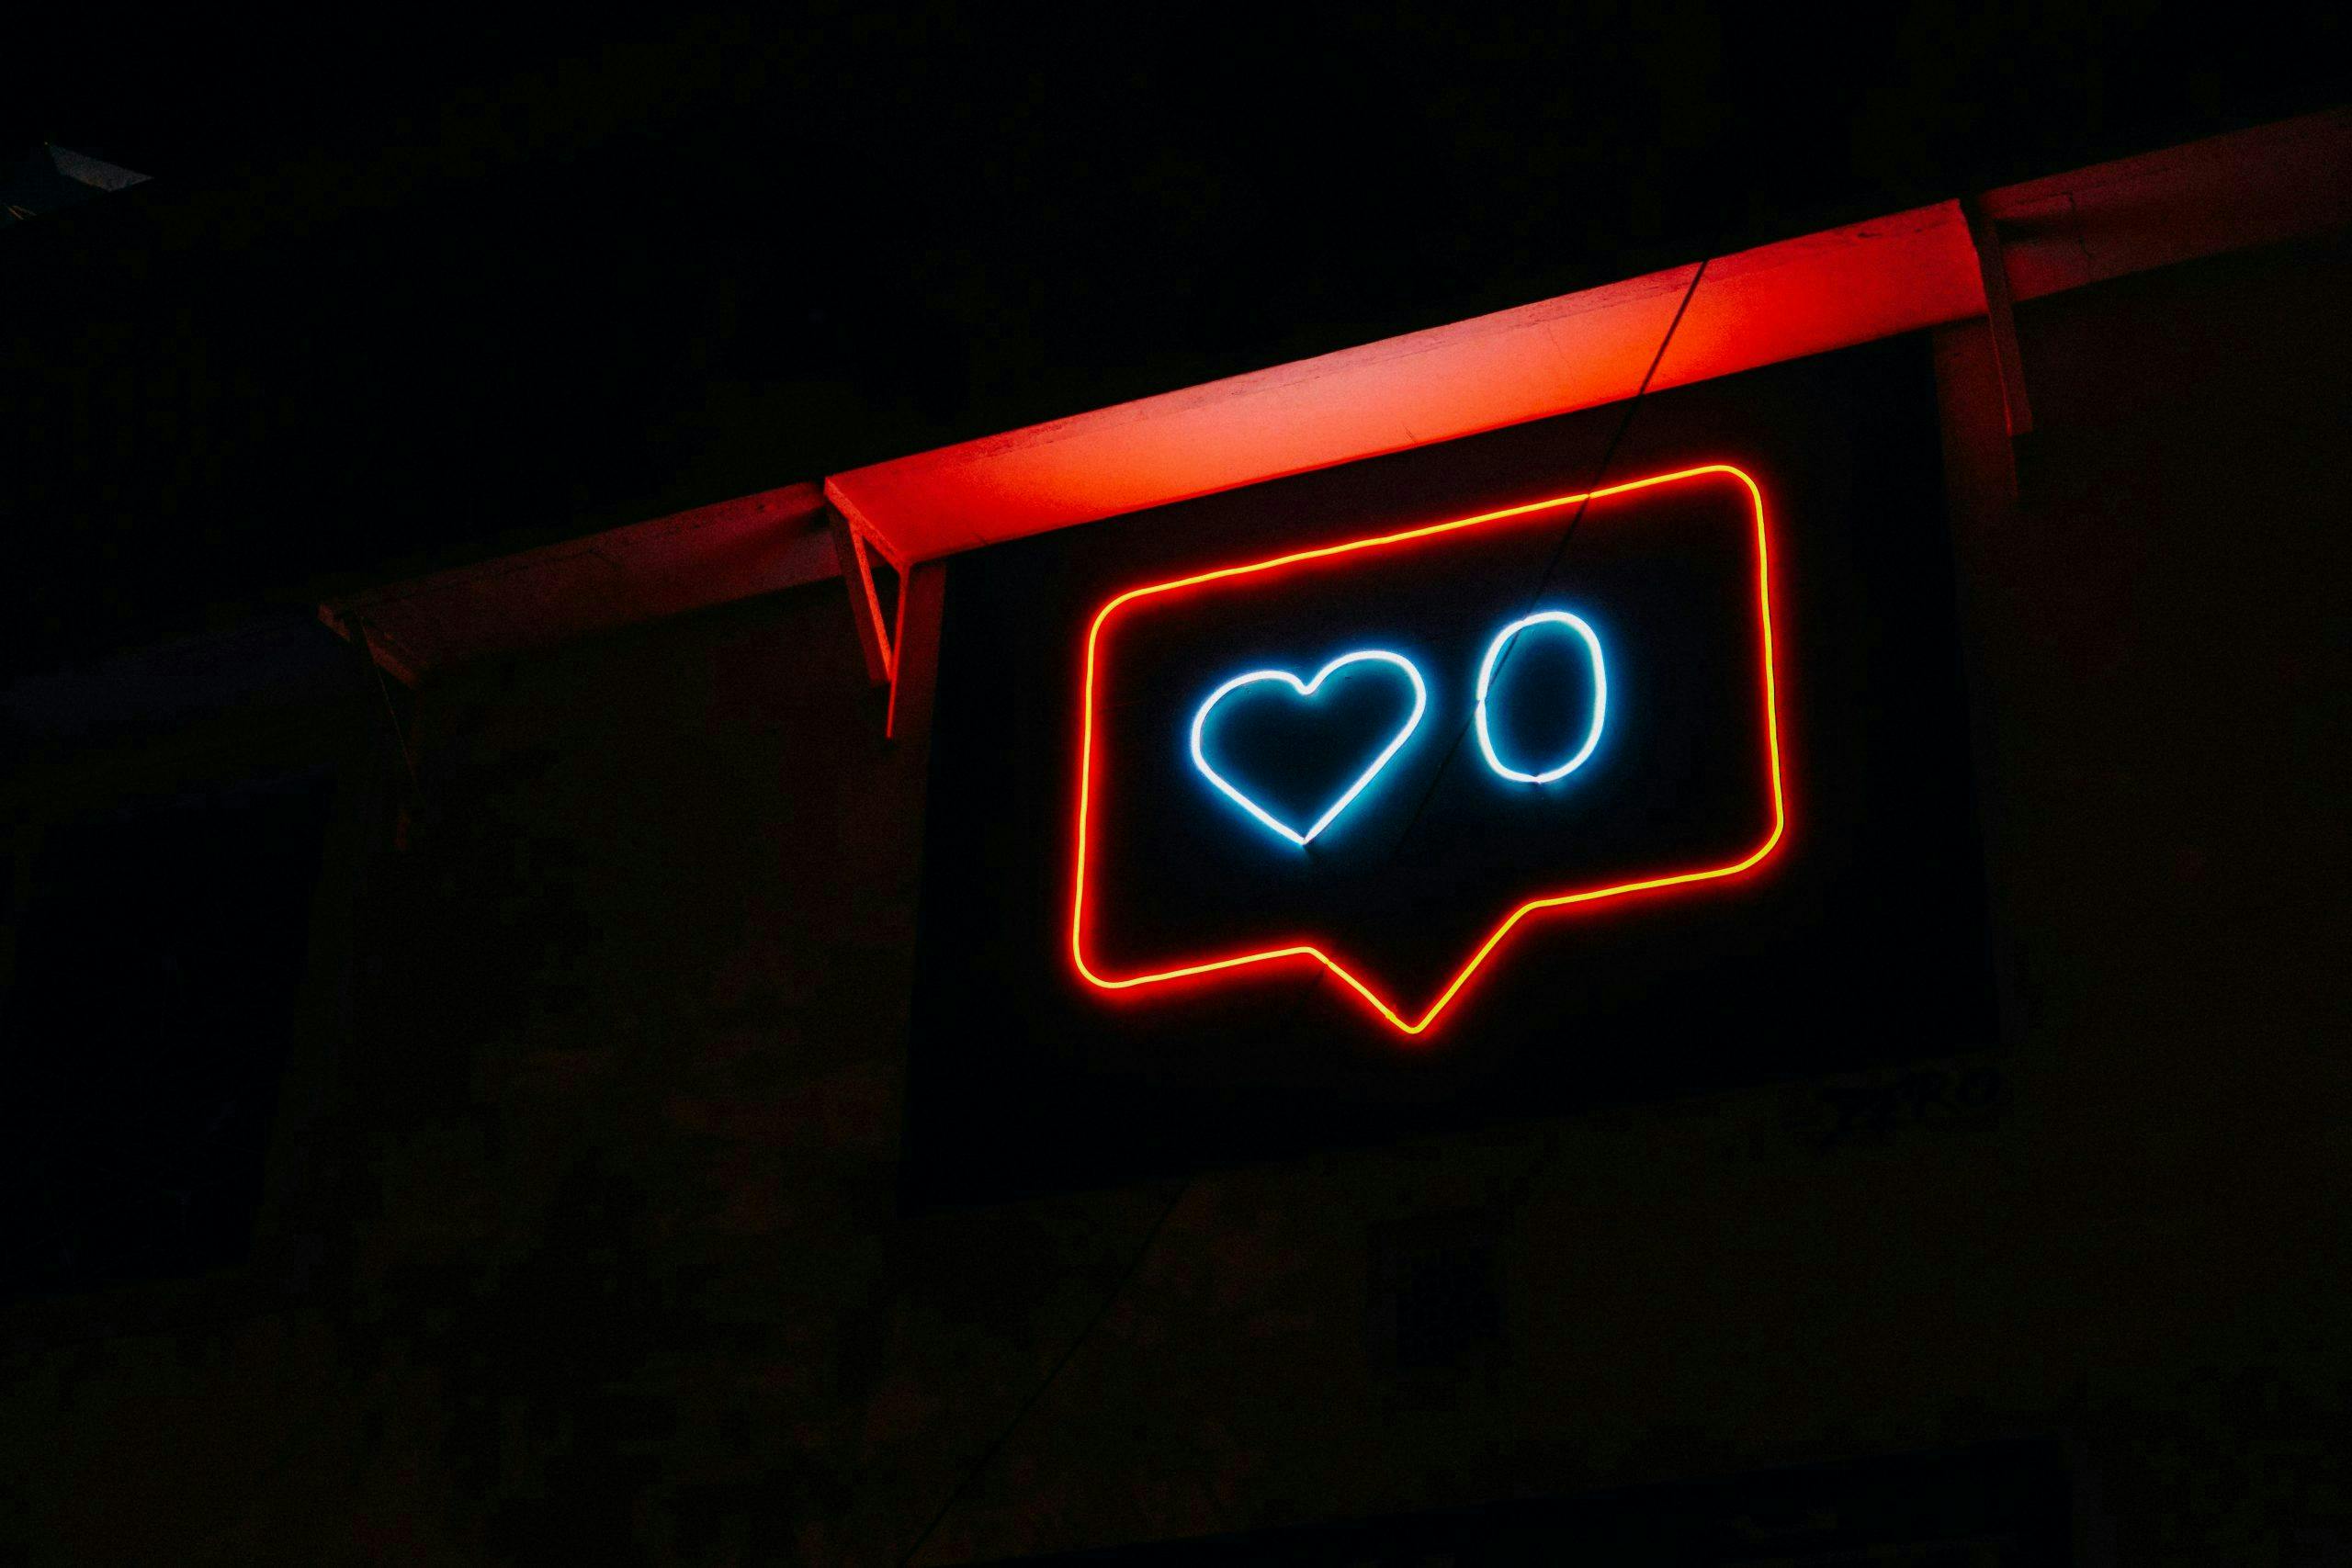 A neon sign displays a heart and the number zero inside a message bubble shape, glowing in blue and red against a dark background.